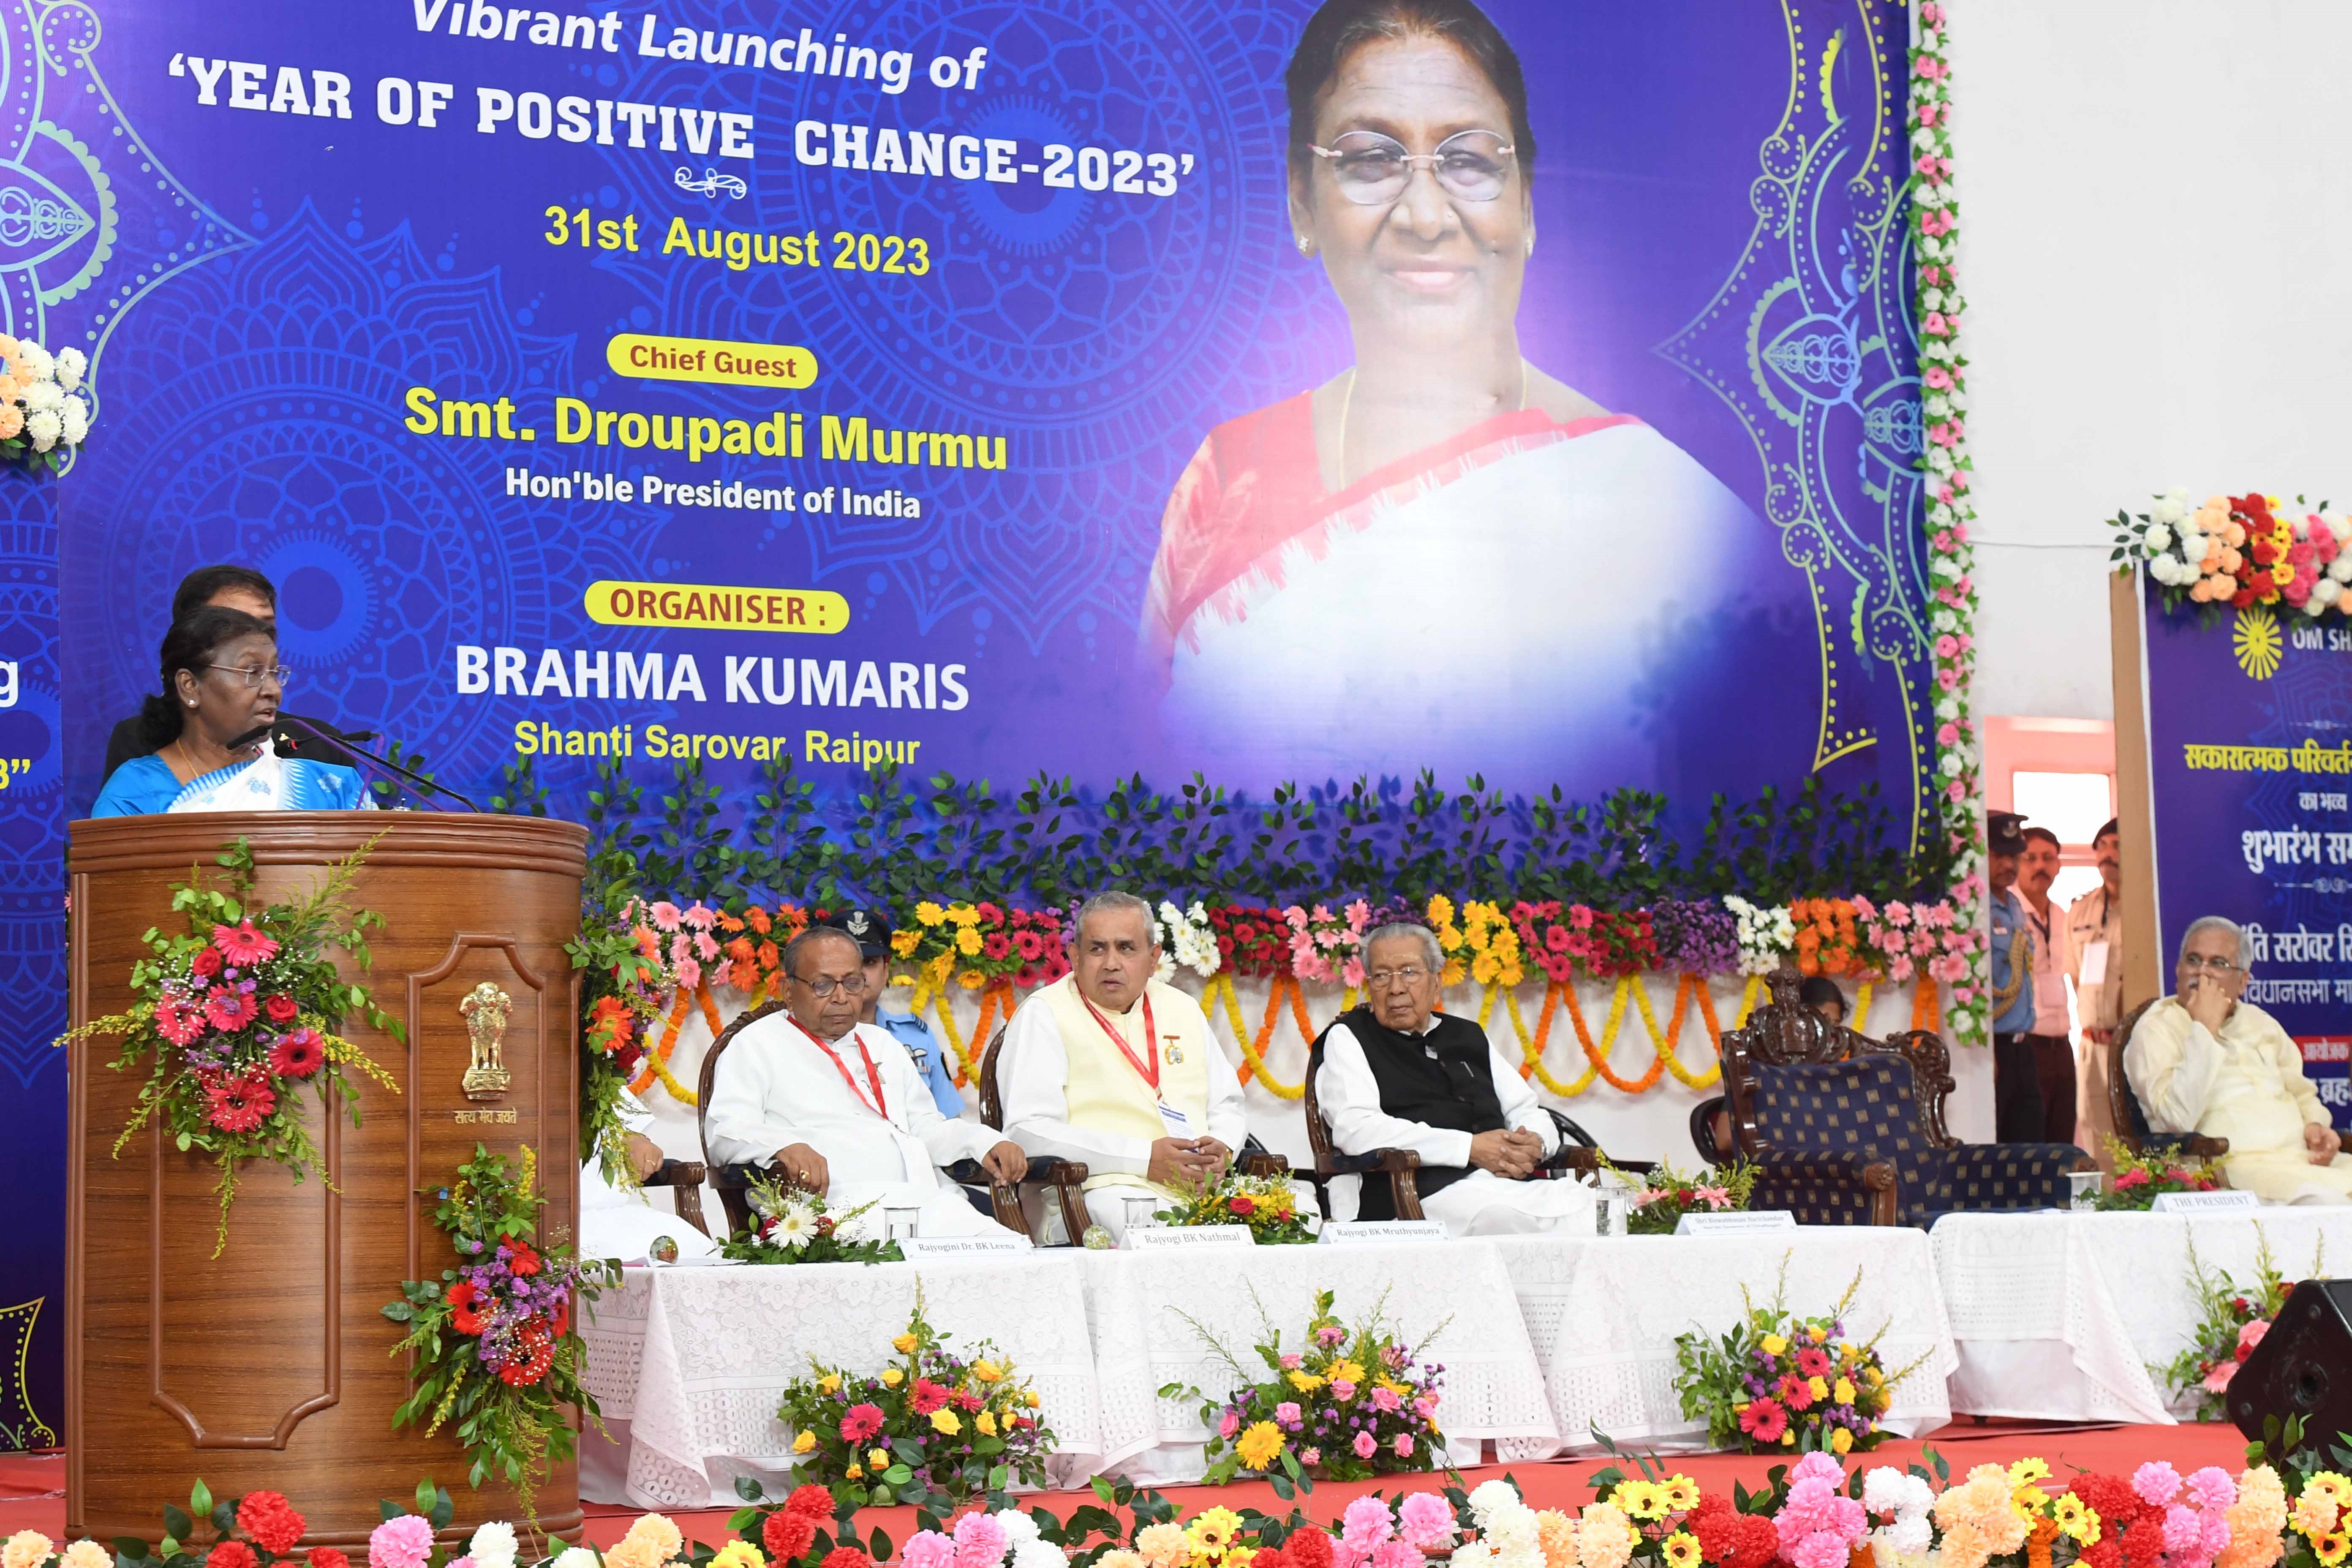 The President of India, Smt Droupadi Murmu  gracing the state level launch of the theme of the year “The Year of Positive Change” of Brahma Kumaris at Raipur, Chhattisgarh on August 31, 2023.